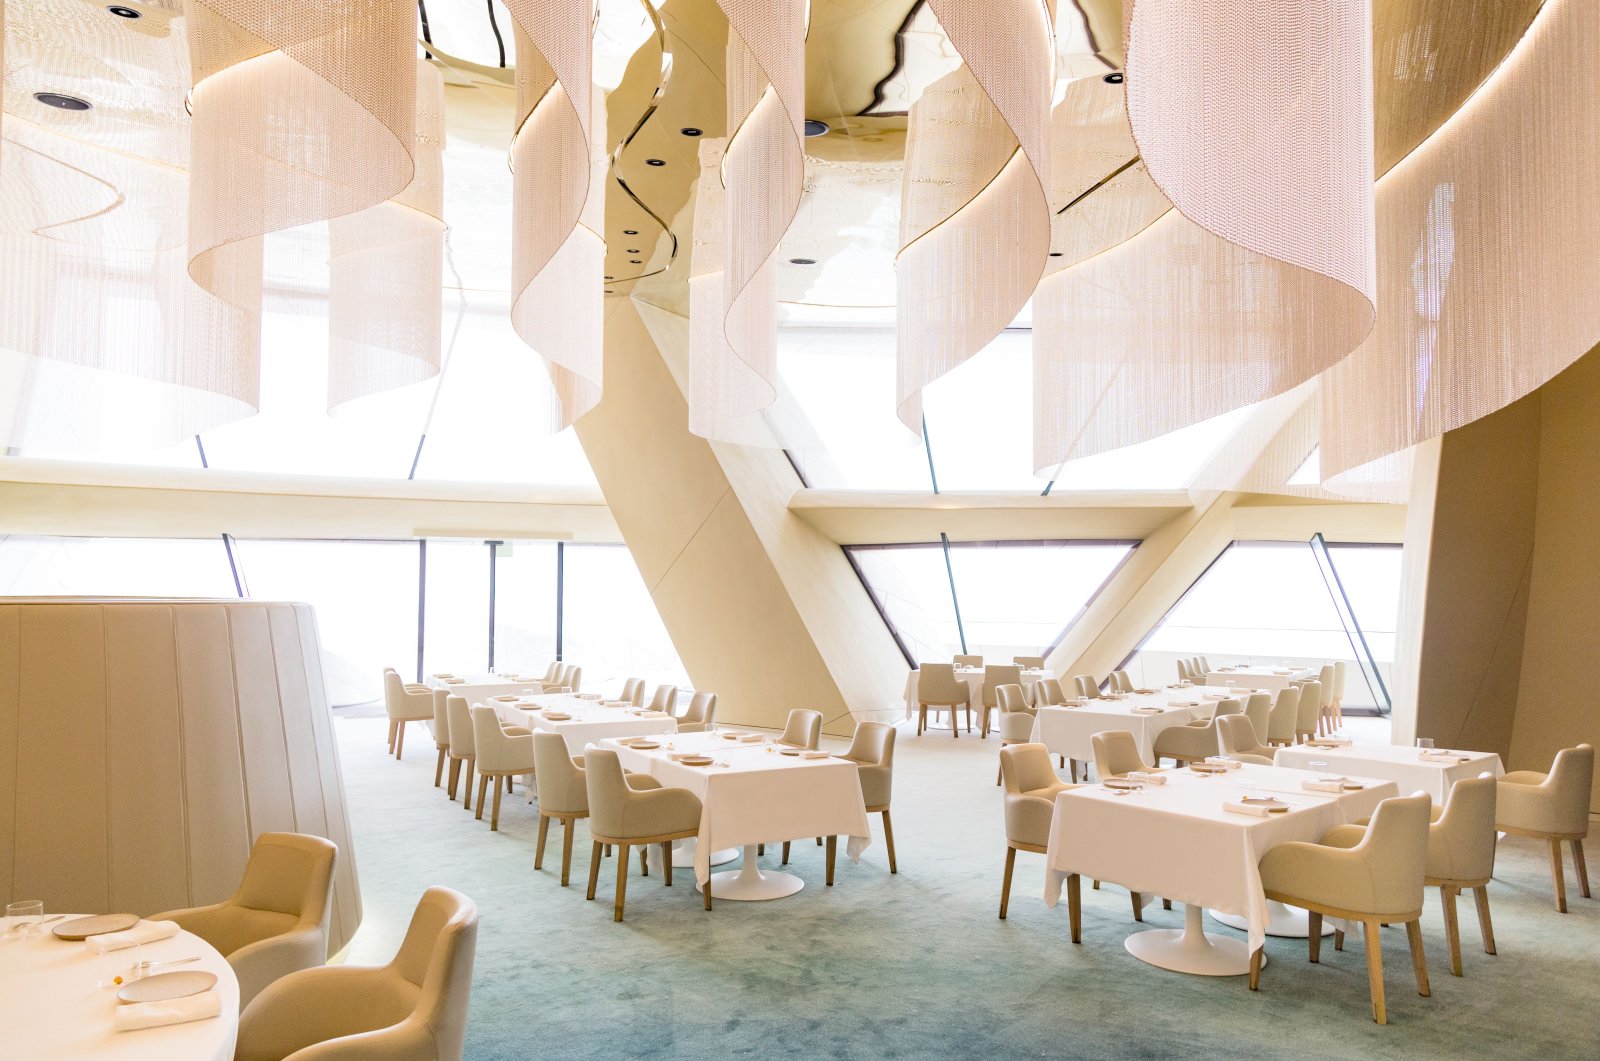 The restaurant Jiwan, Qatari for &quot;The Perfect Pearl,&quot; is decorated in warm cream and gold tones. The meters-high windows offer a dreamlike view of the Doha skyline and the sea, Qatar, March 10, 2020. (dpa Photo)